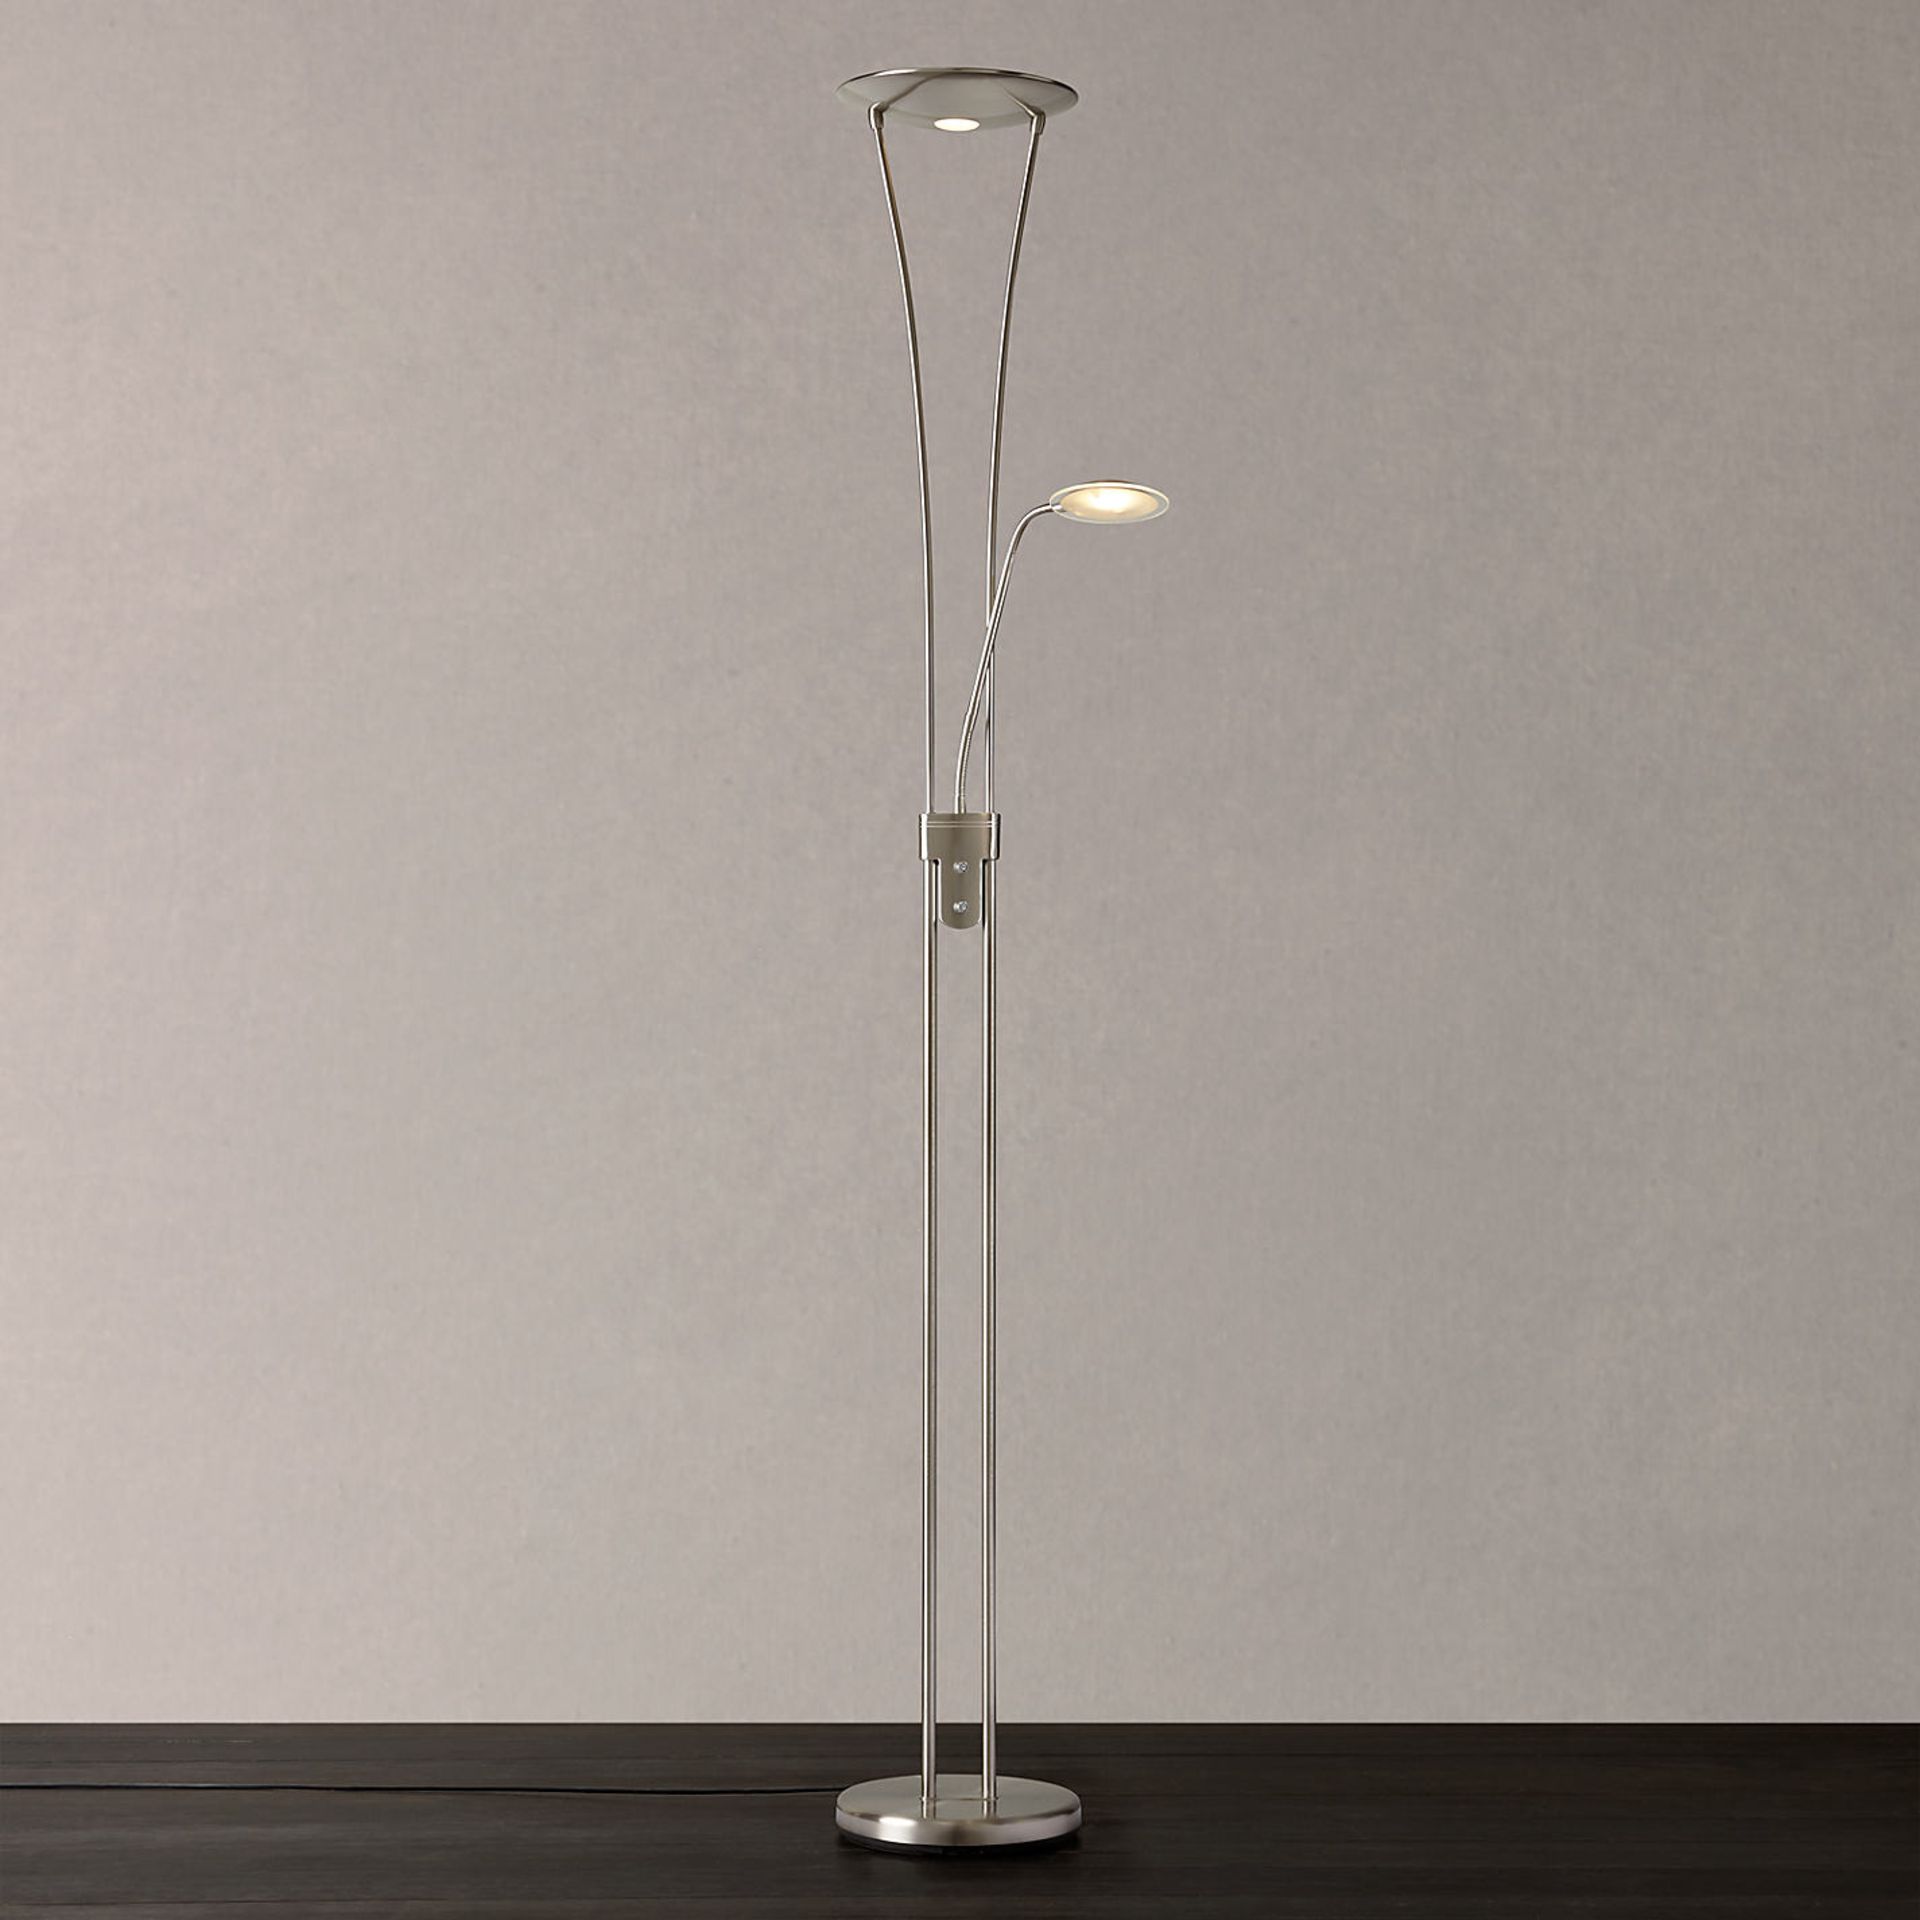 3 x ASSORTED FLOOR LAMPS RRP £130 EACH (10.10.17) *PLEASE NOTE THAT THE BID PRICE IS MULTIPLIED BY